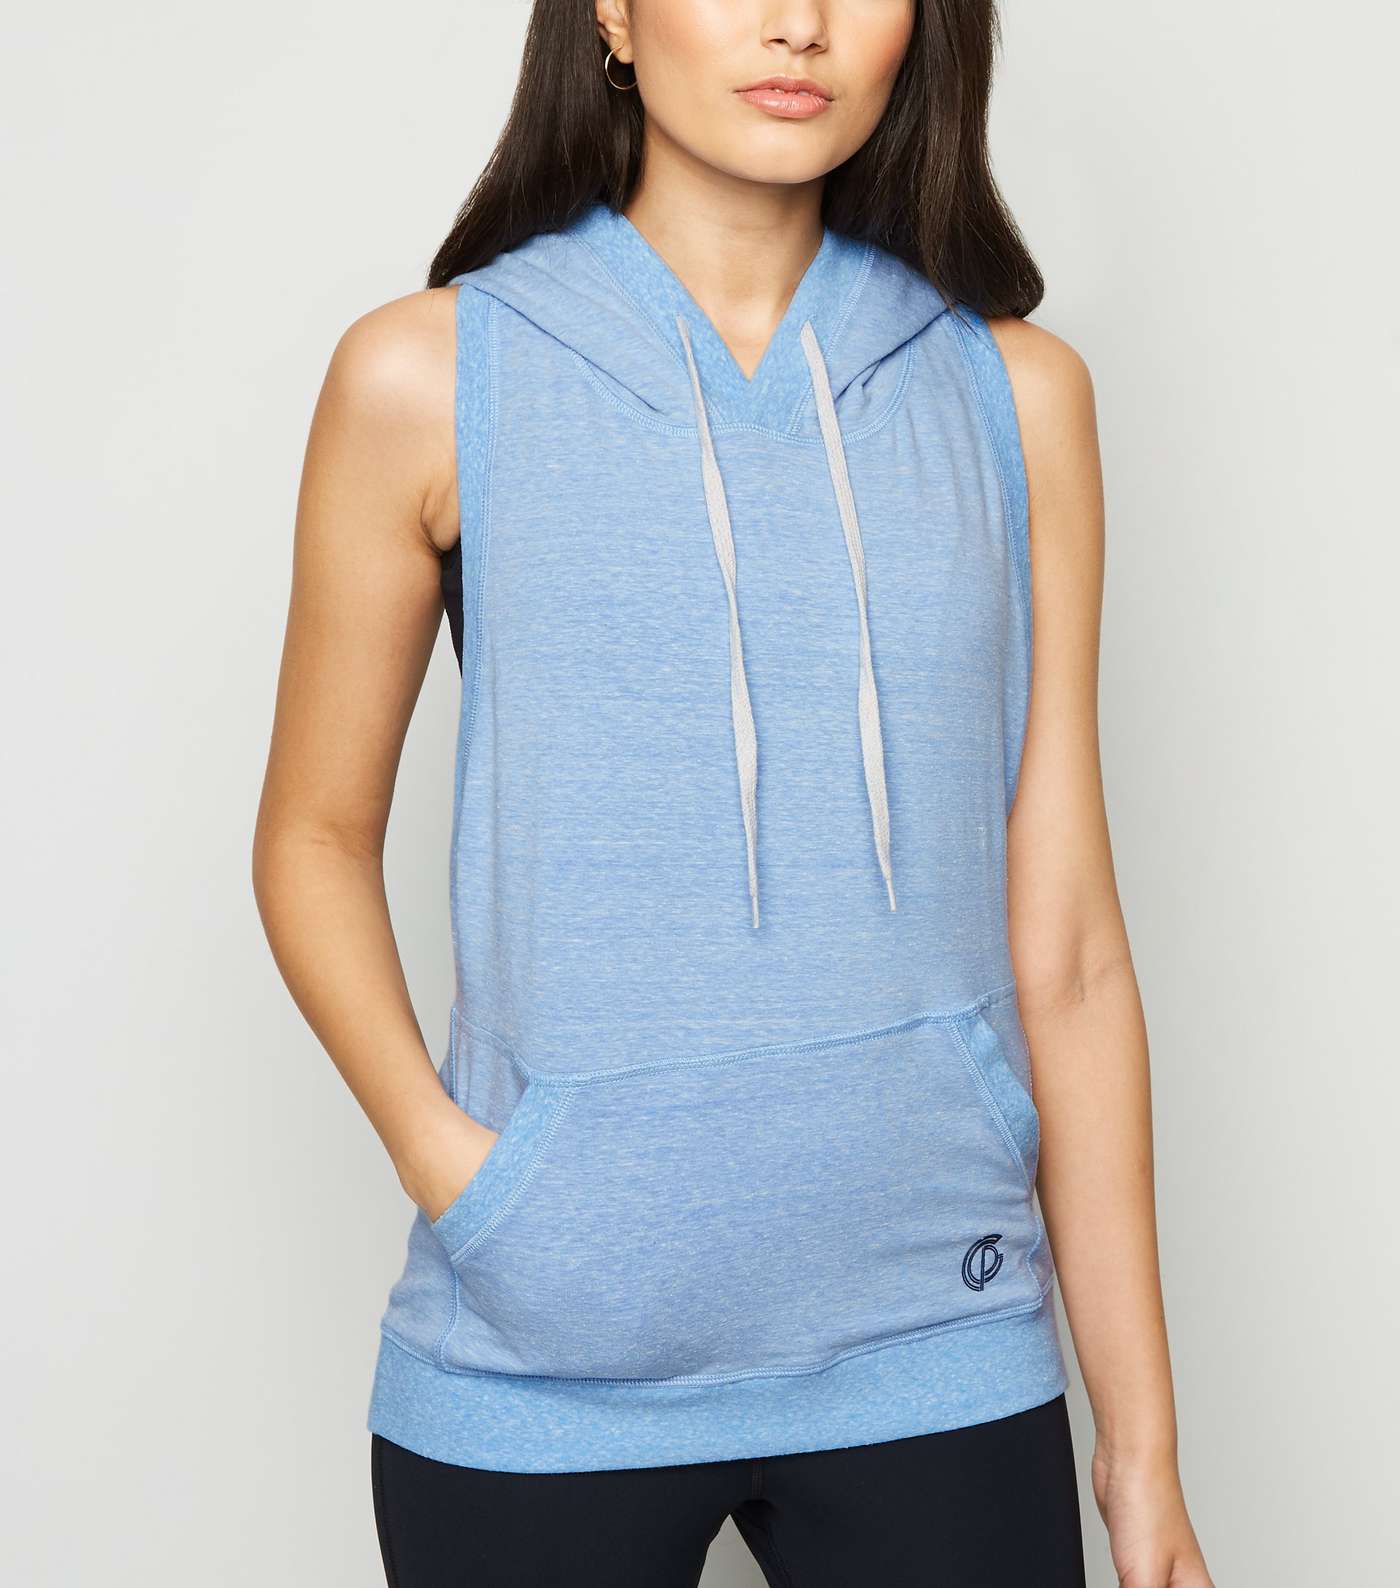 GymPro Pale Blue Backless Sports Hoodie